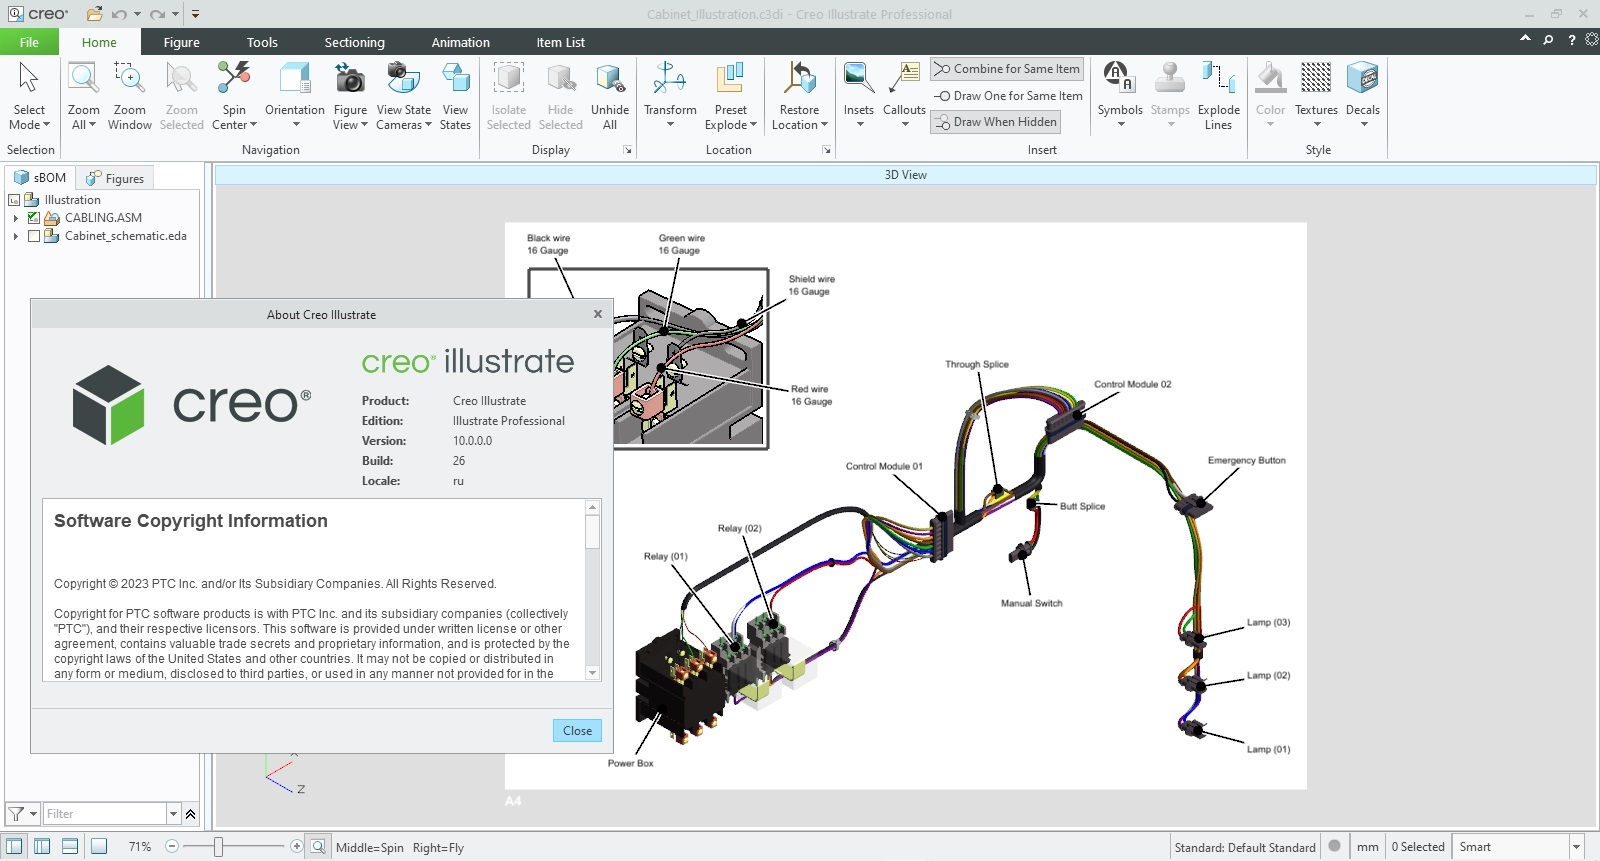 Working with PTC Creo Illustrate 10.0.0.0 full license